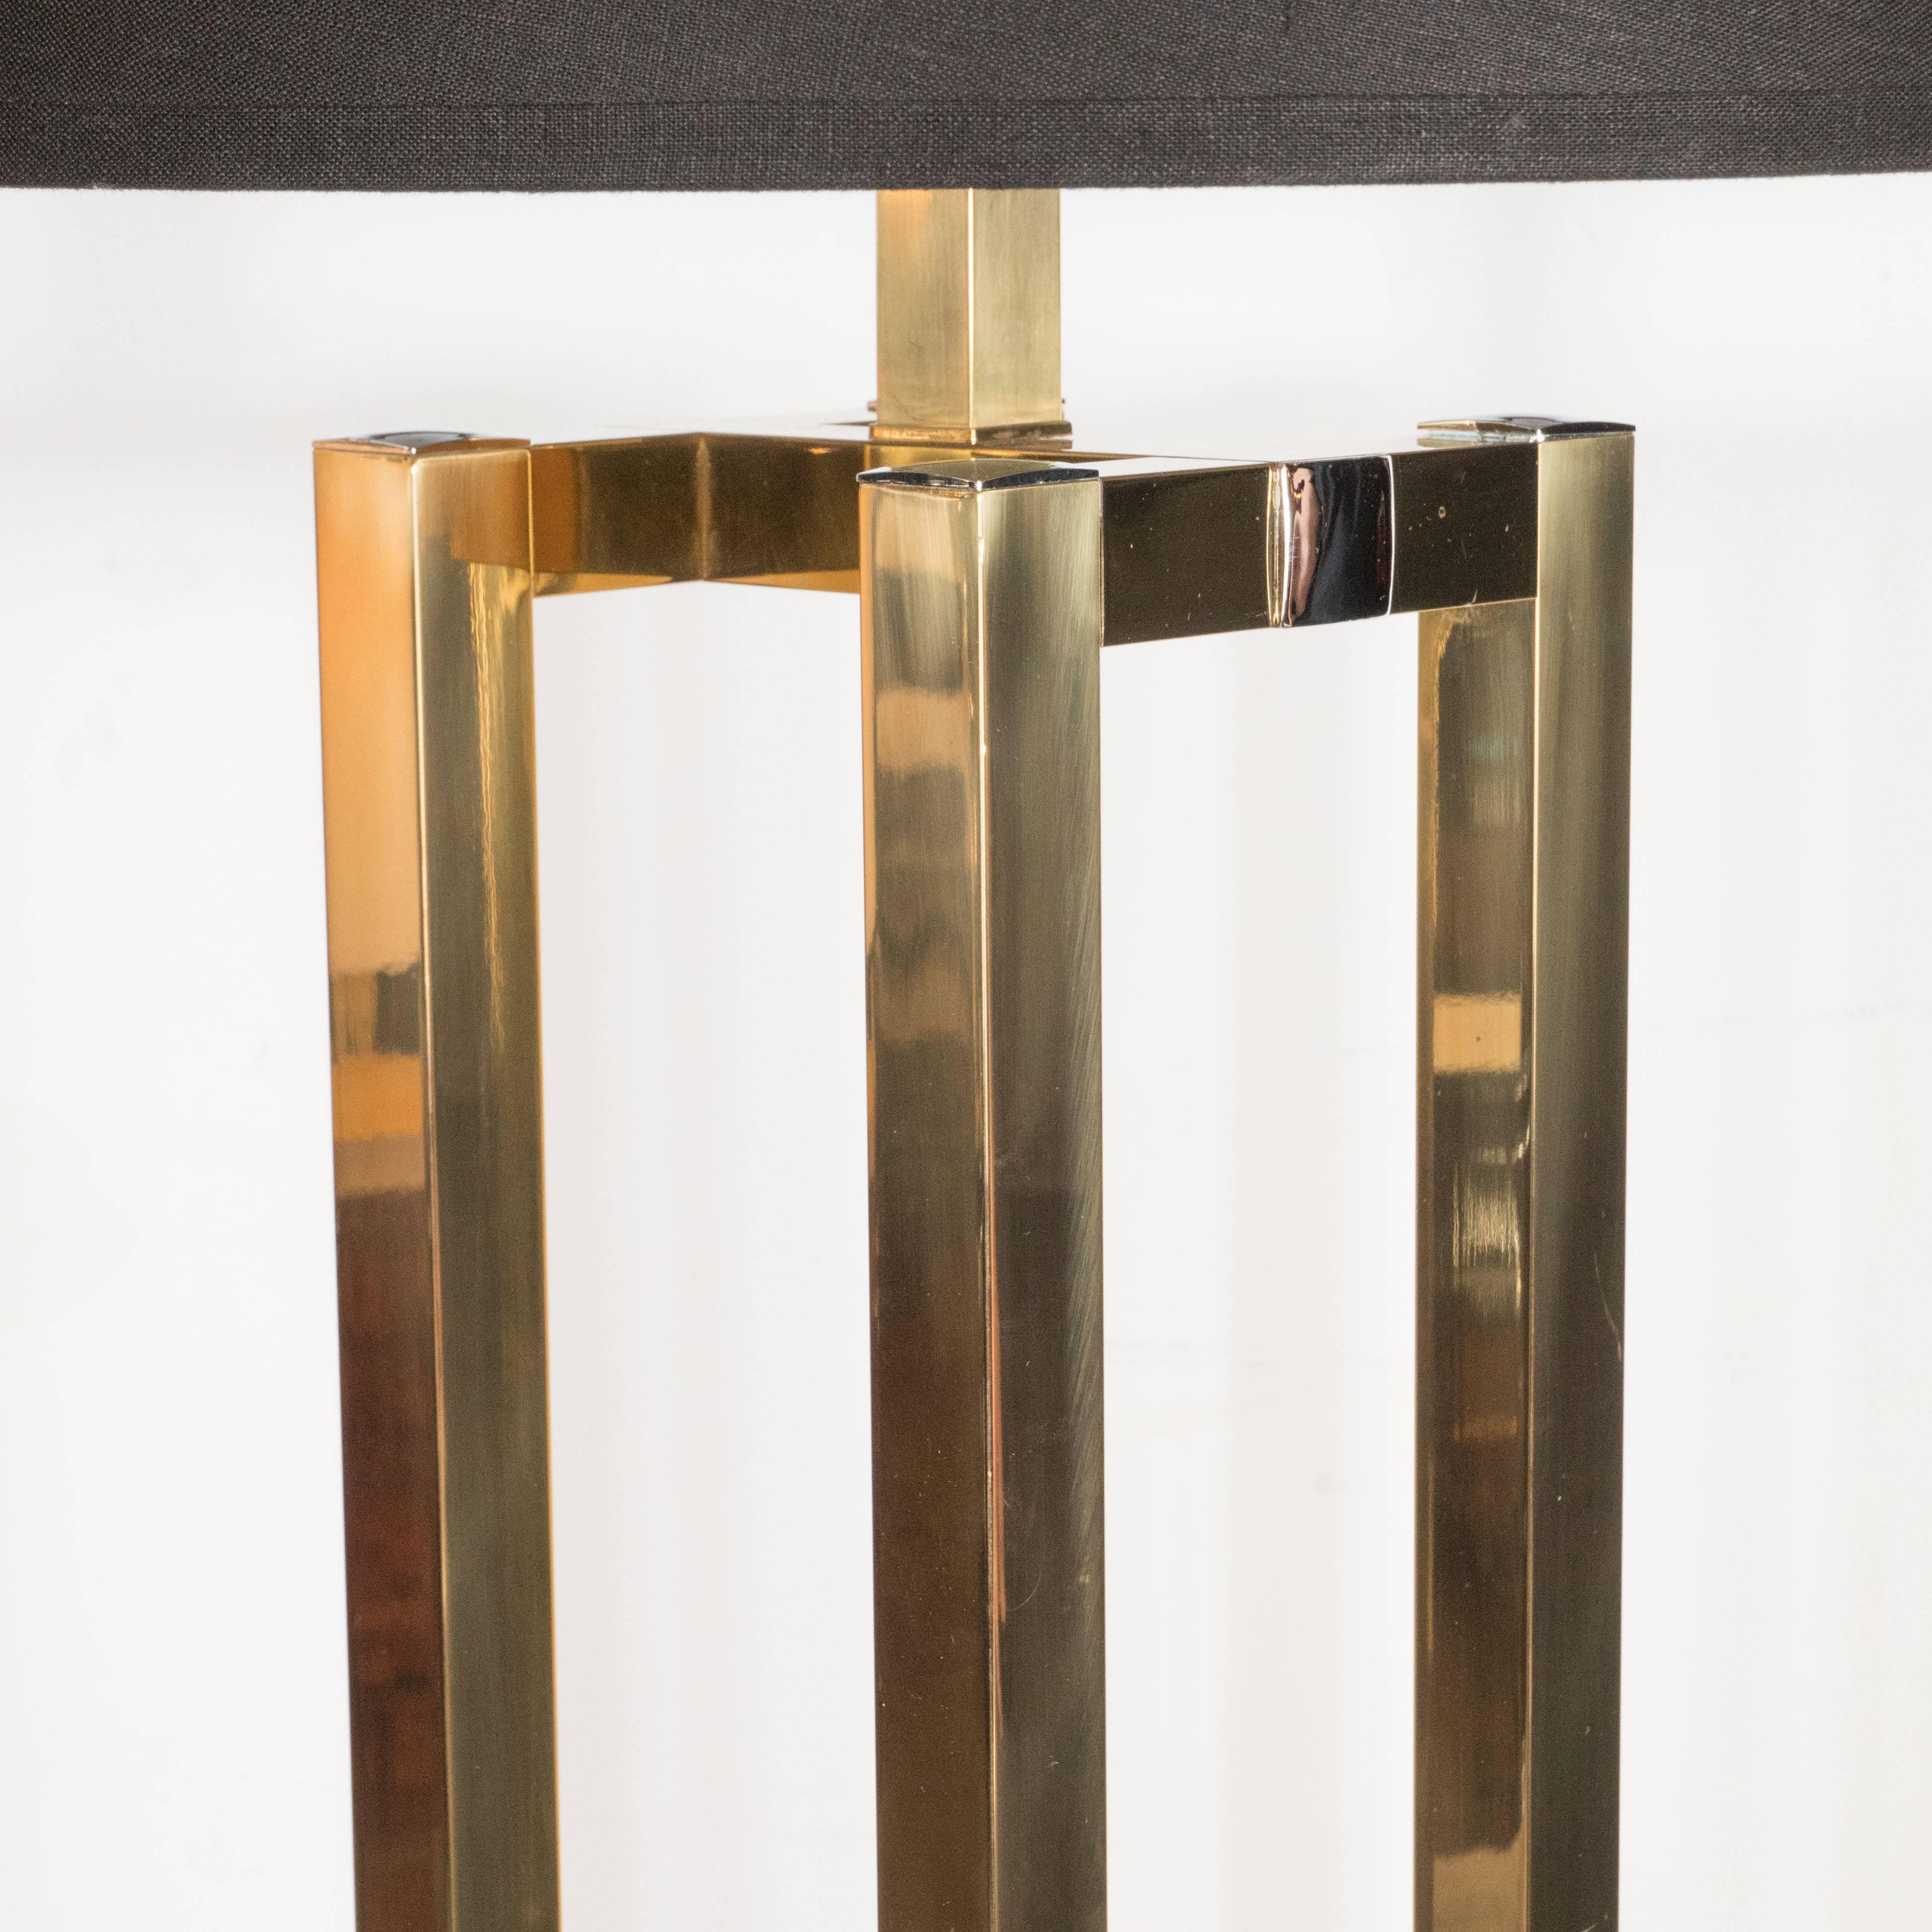 Late 20th Century Pair of Mid-Century Modernist Chrome and Brass Floor Lamps by Willy Rizzo